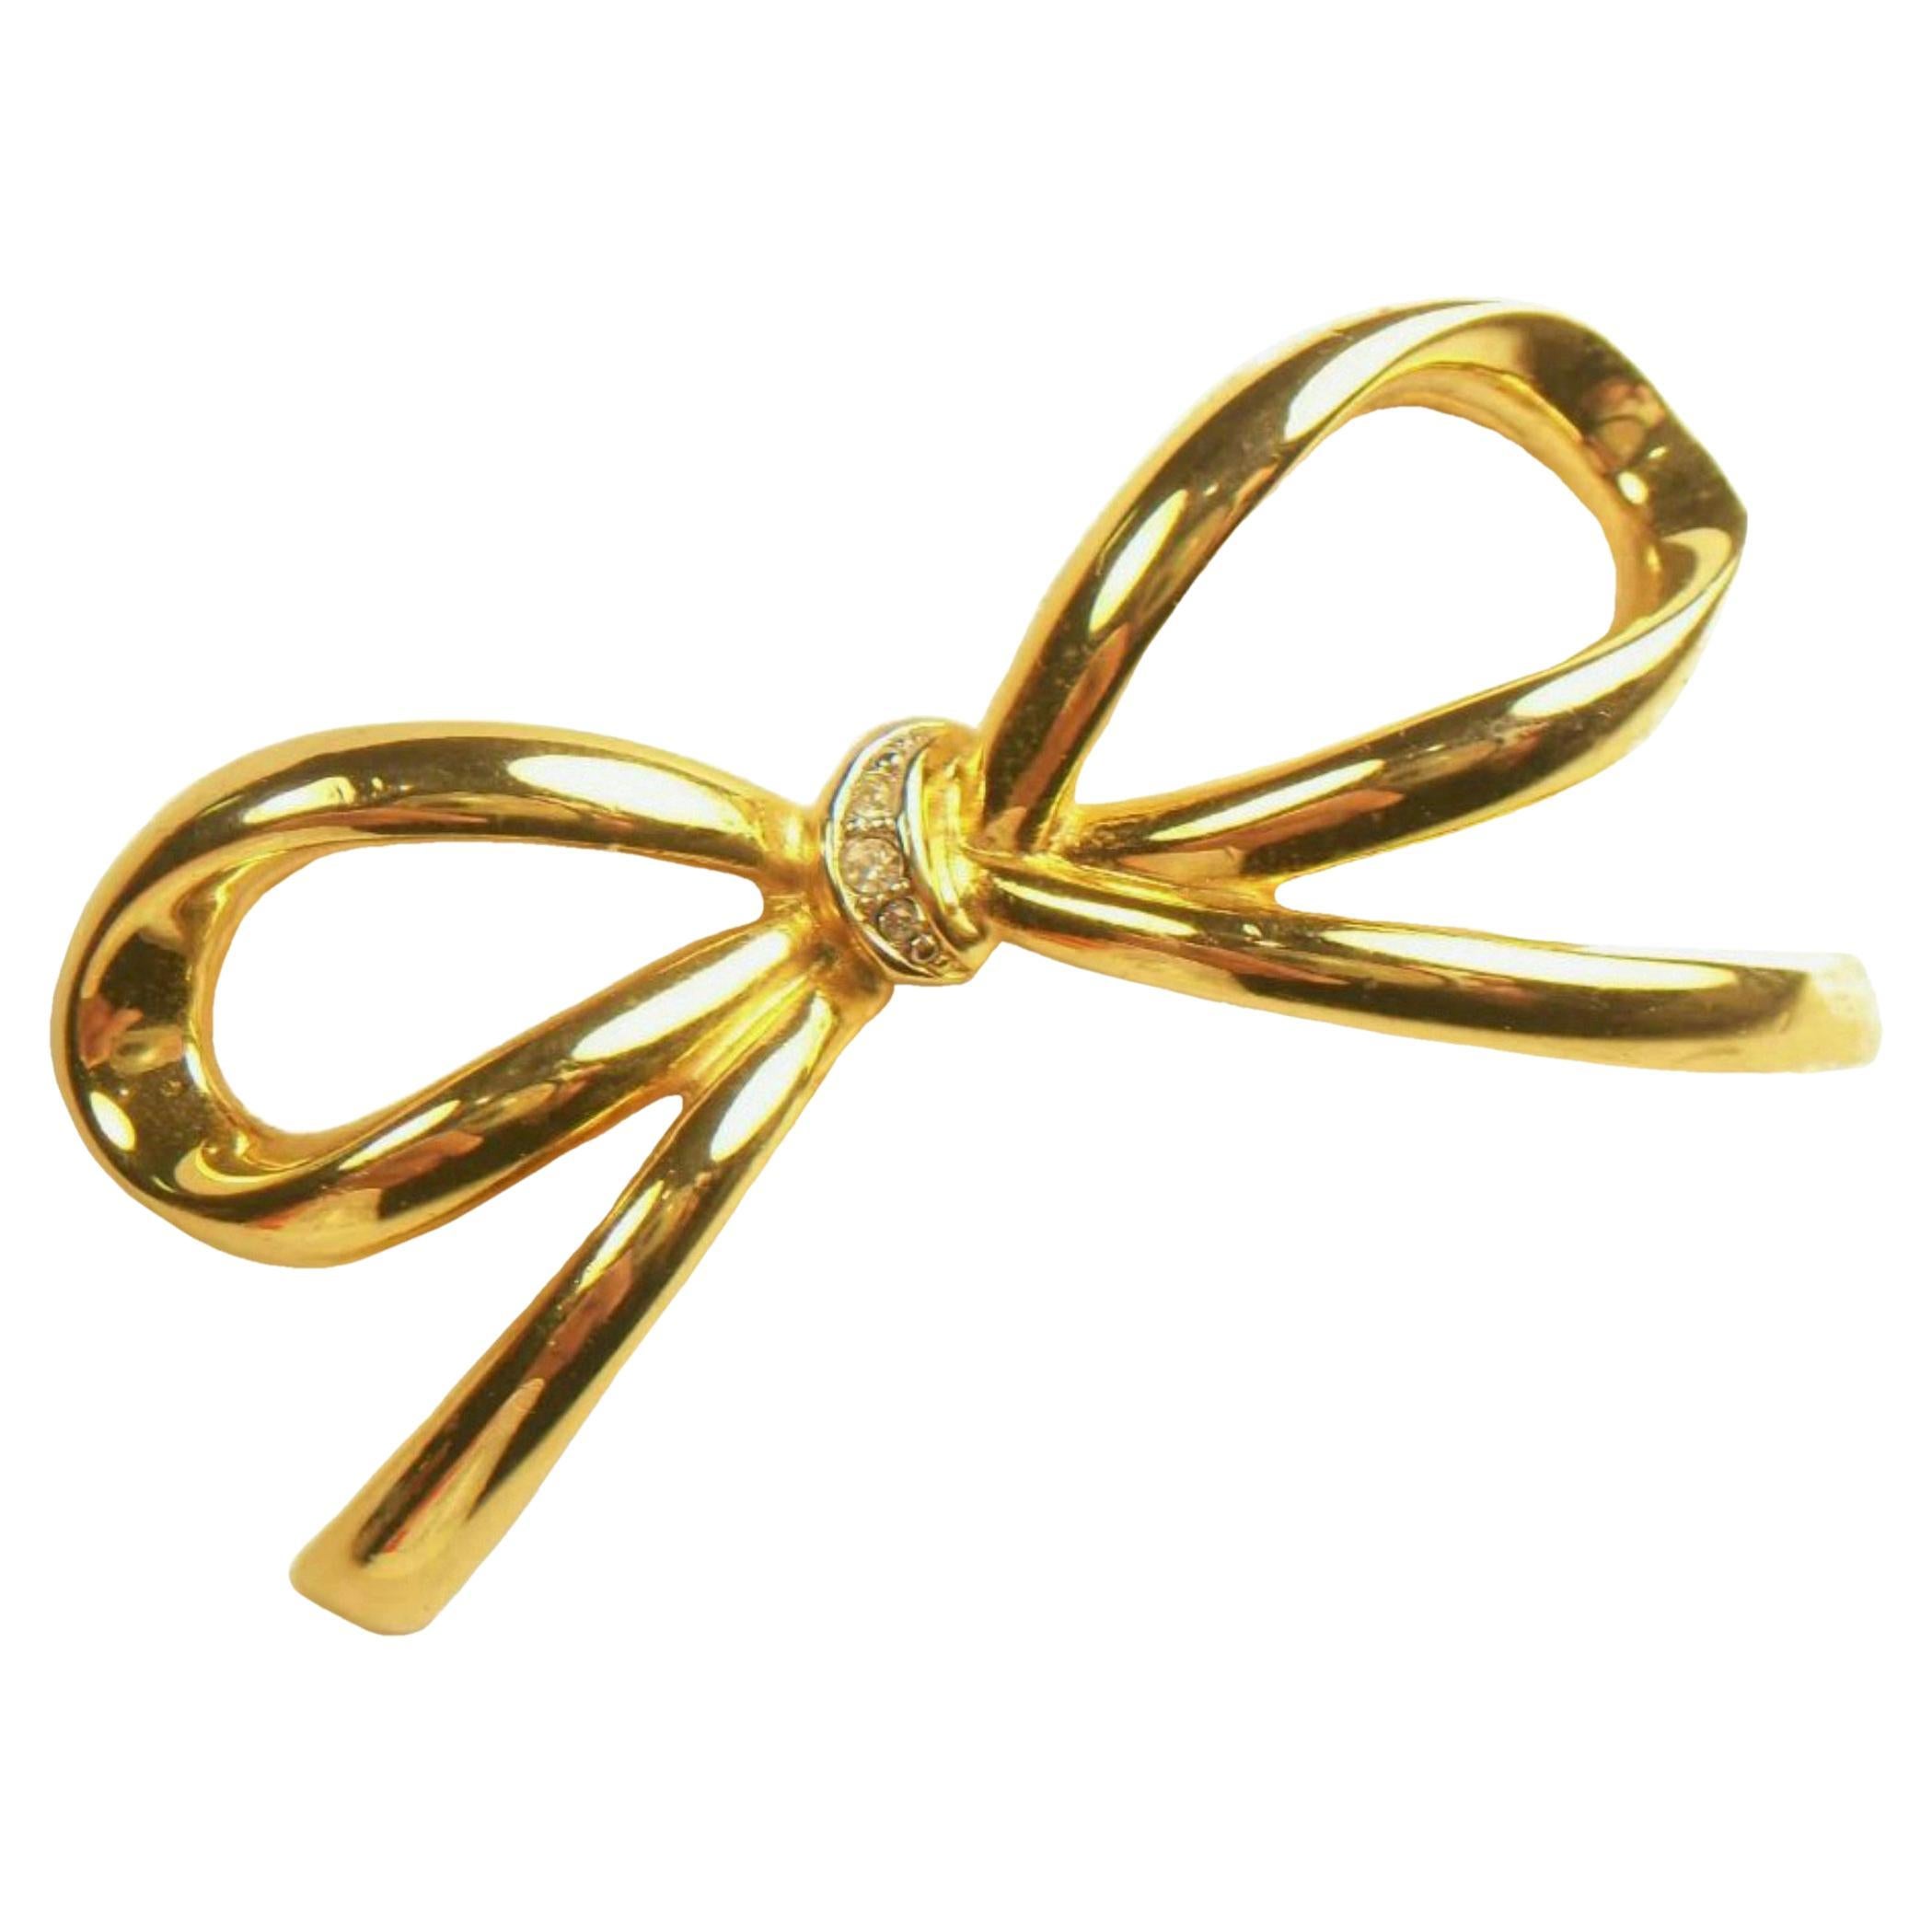 Vintage Gold Tone & Rhinestone Bow Brooch - Unsigned - Late 20th Century